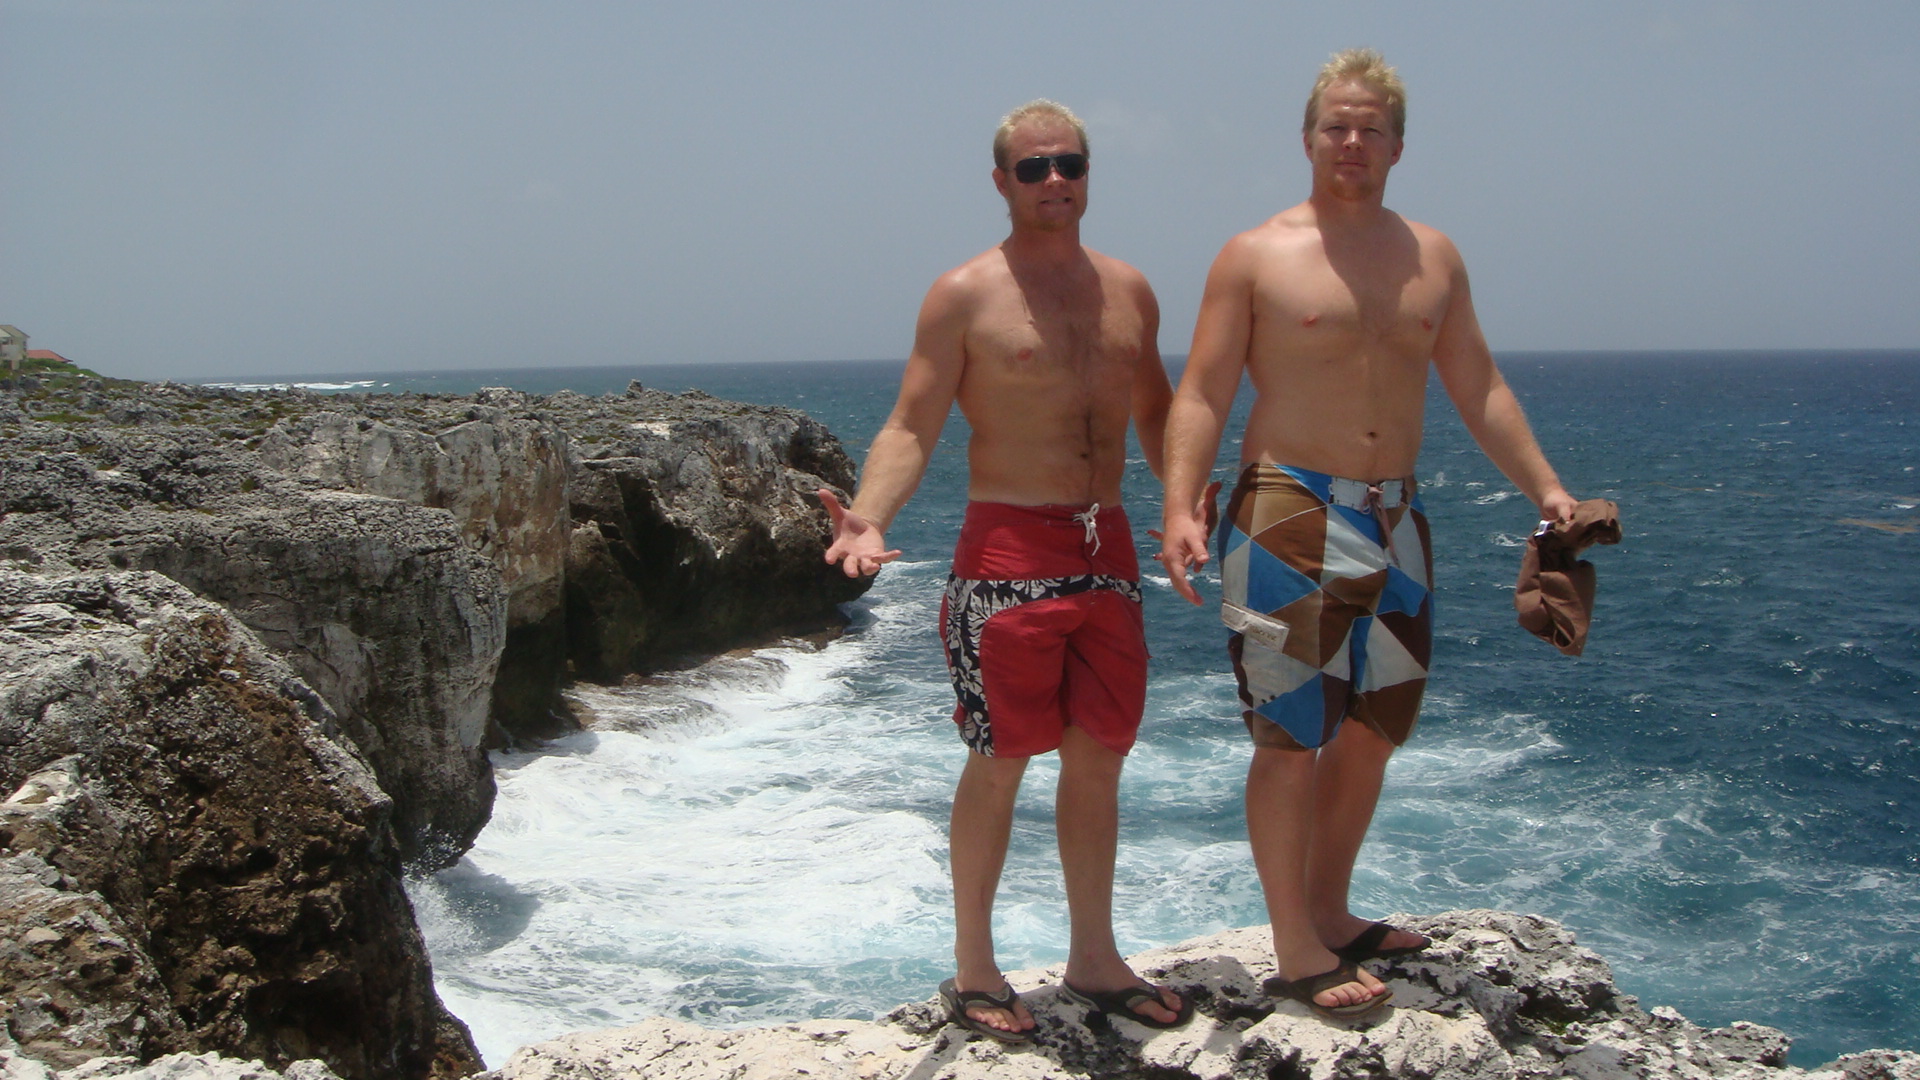 Kirk and Chad at the cliff in Cayman